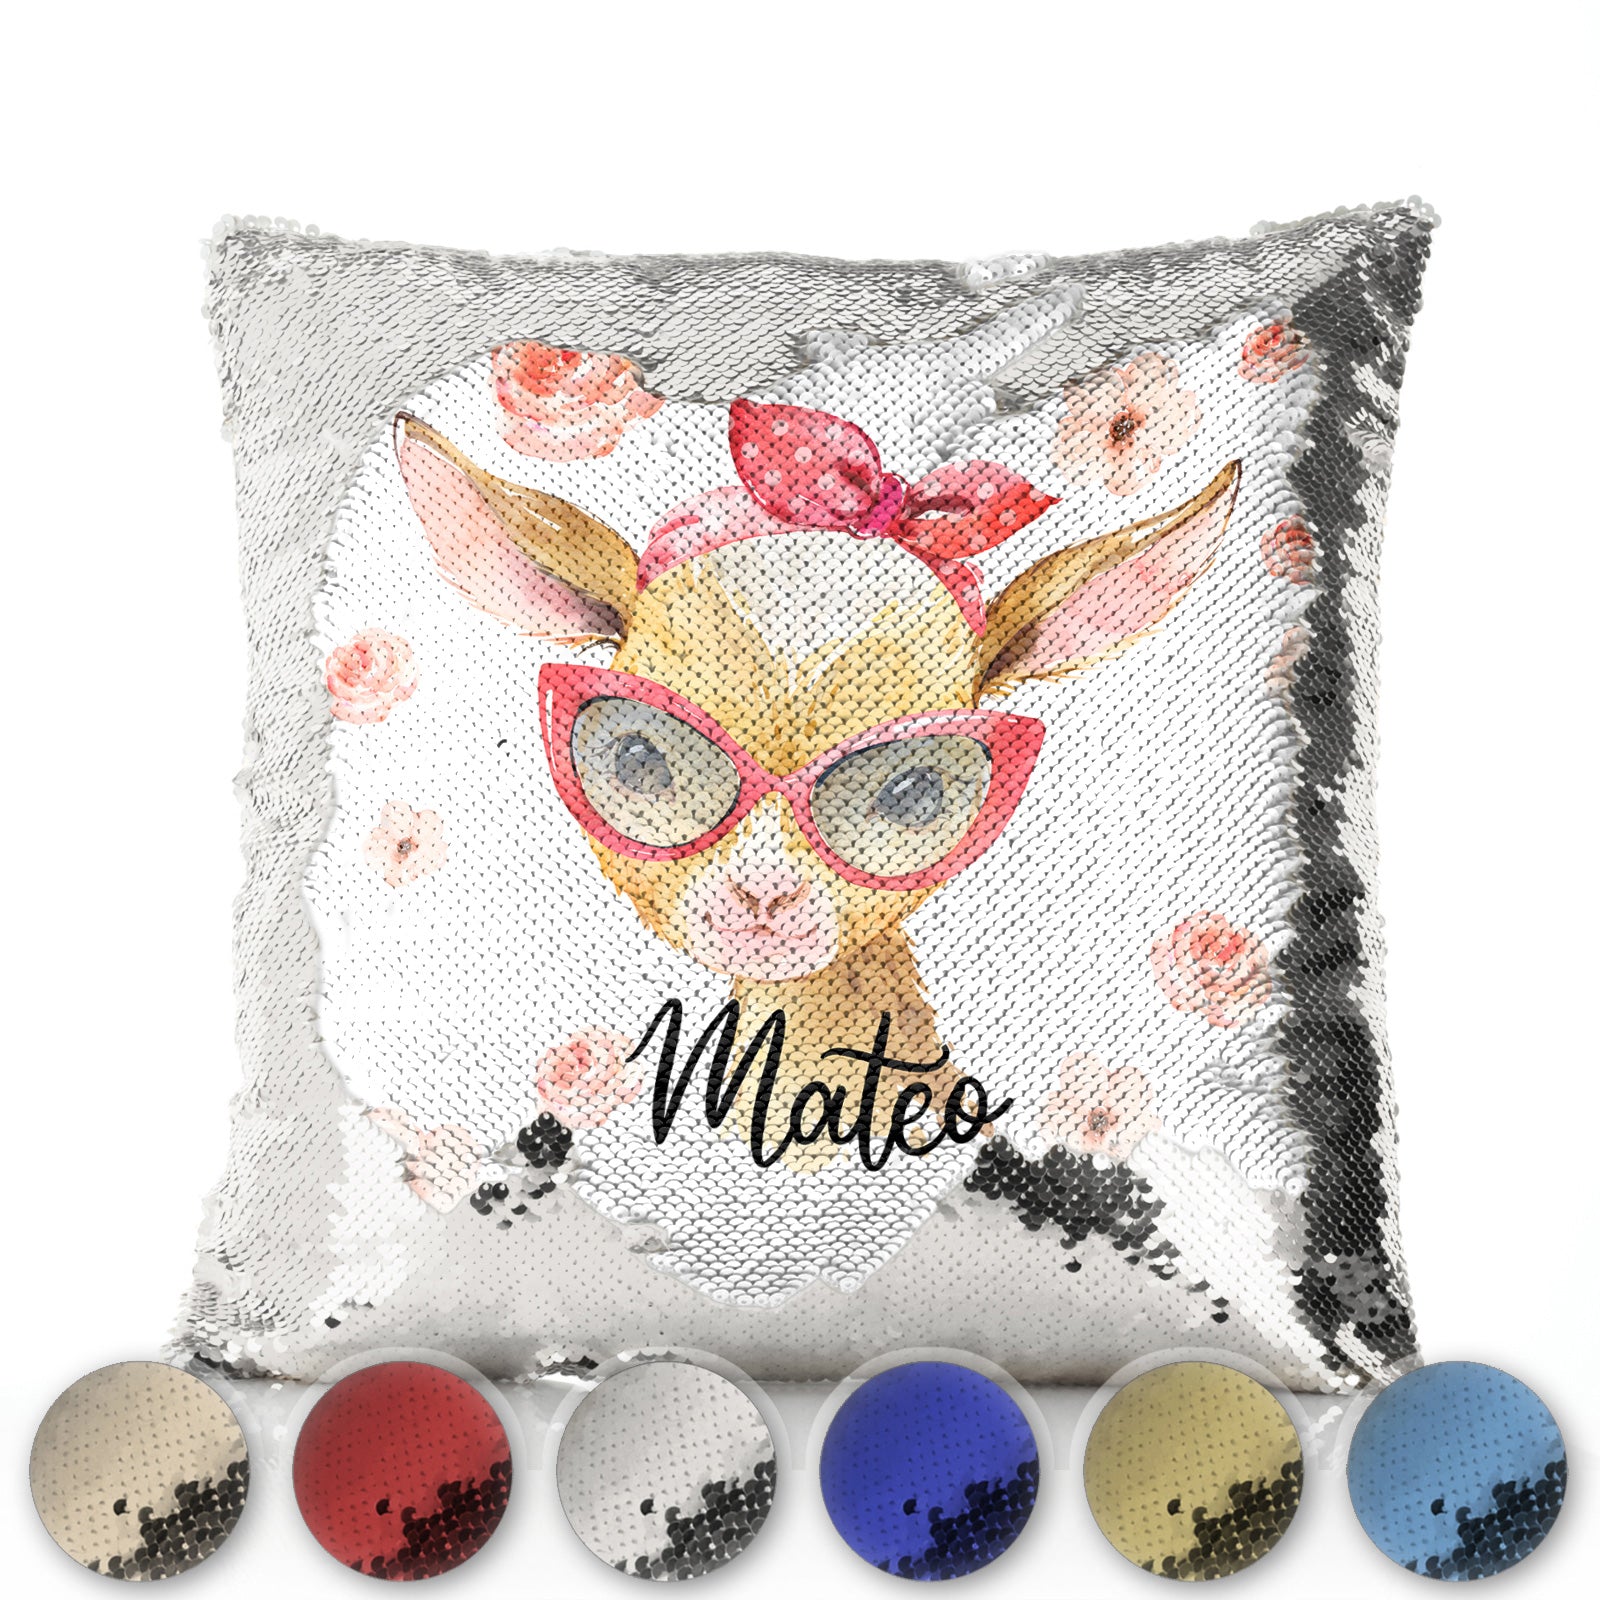 Personalised Sequin Cushion with Goat Pink Glasses and Roses and Cute Text